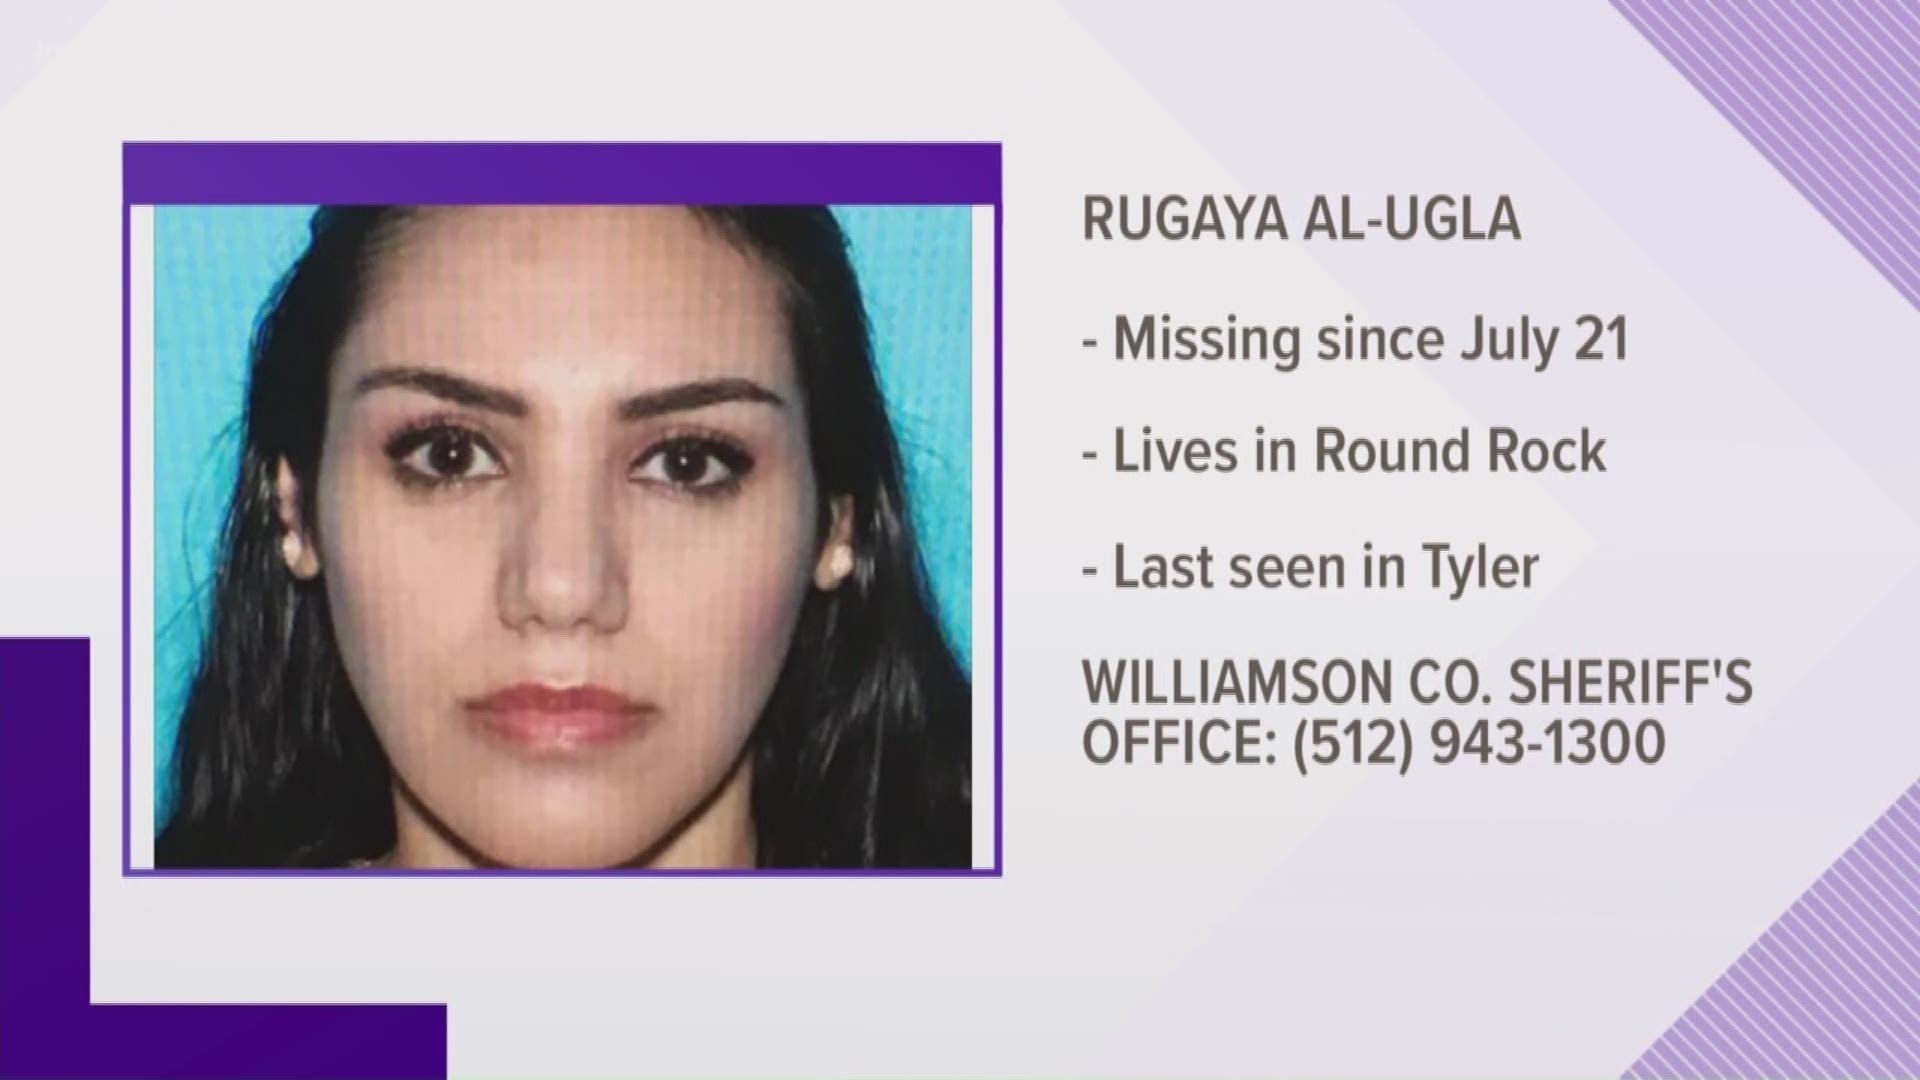 If you have seen her or have any other information, you are encouraged to contact the Williamson County Sheriff's Office.